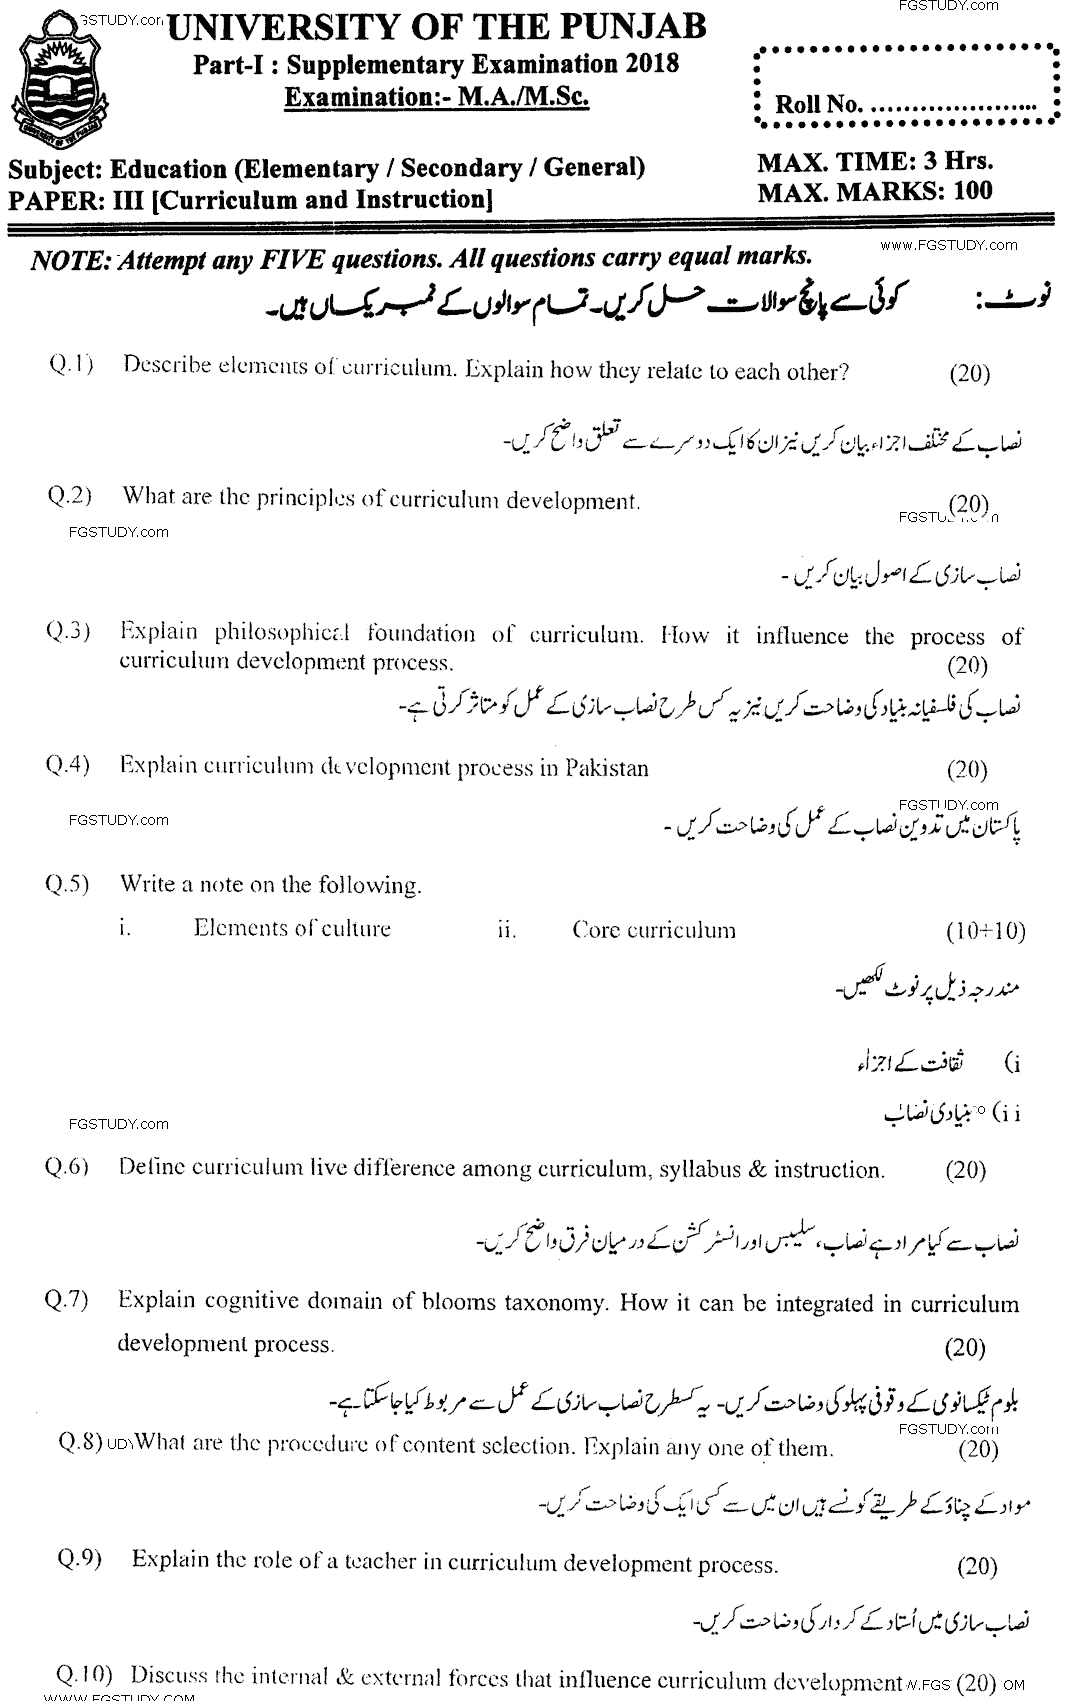 Ma Part 1 Education Elementary Curriculum And Instruction Past Paper 2018 Punjab University